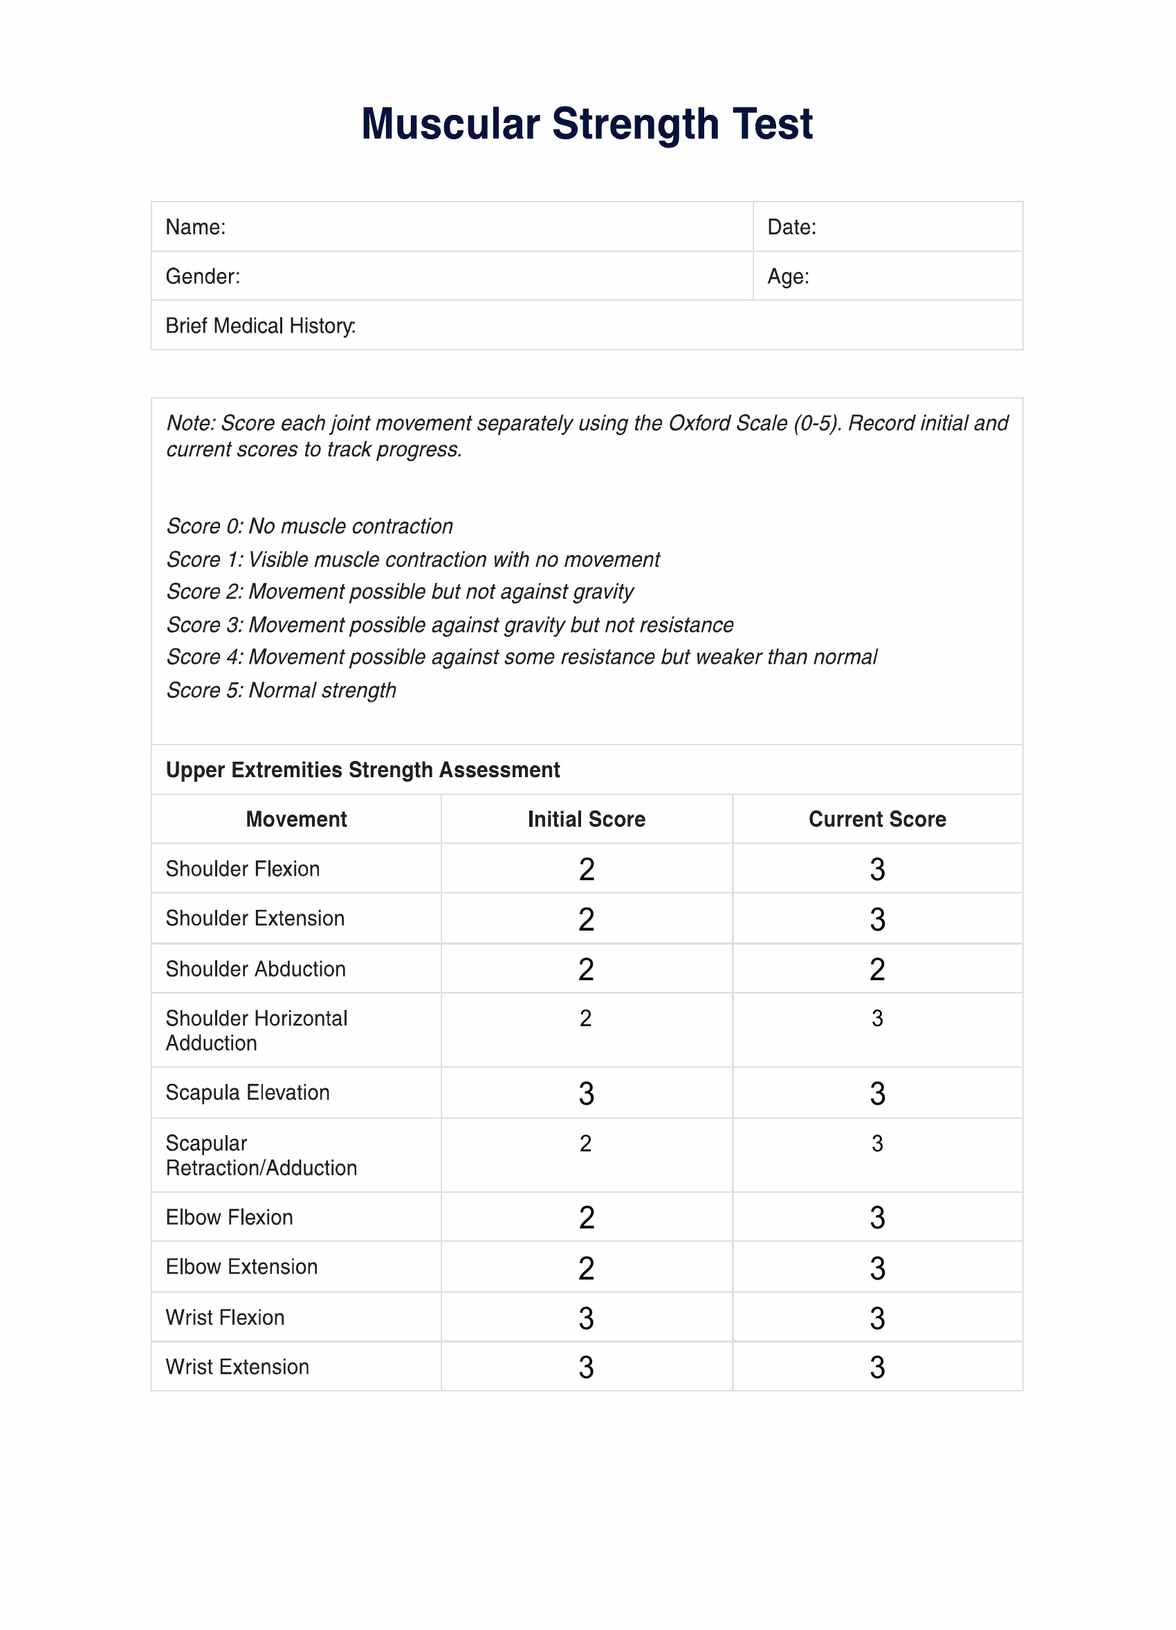 Muscular Strength Test PDF Example